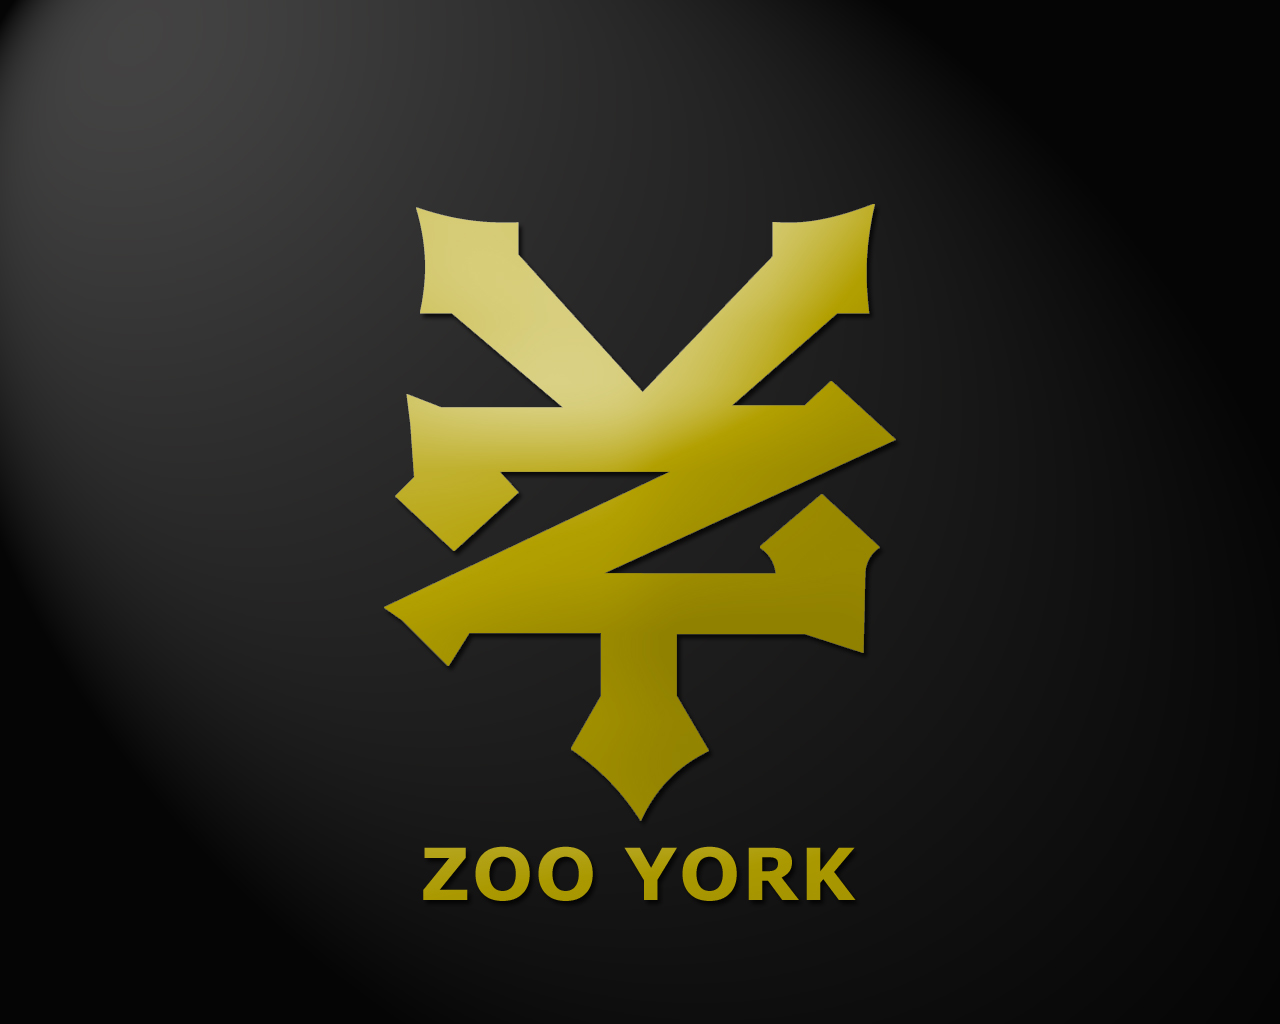 Zoo York 3d Gold Logo Skateboars Image Picture HD Wallpaper For